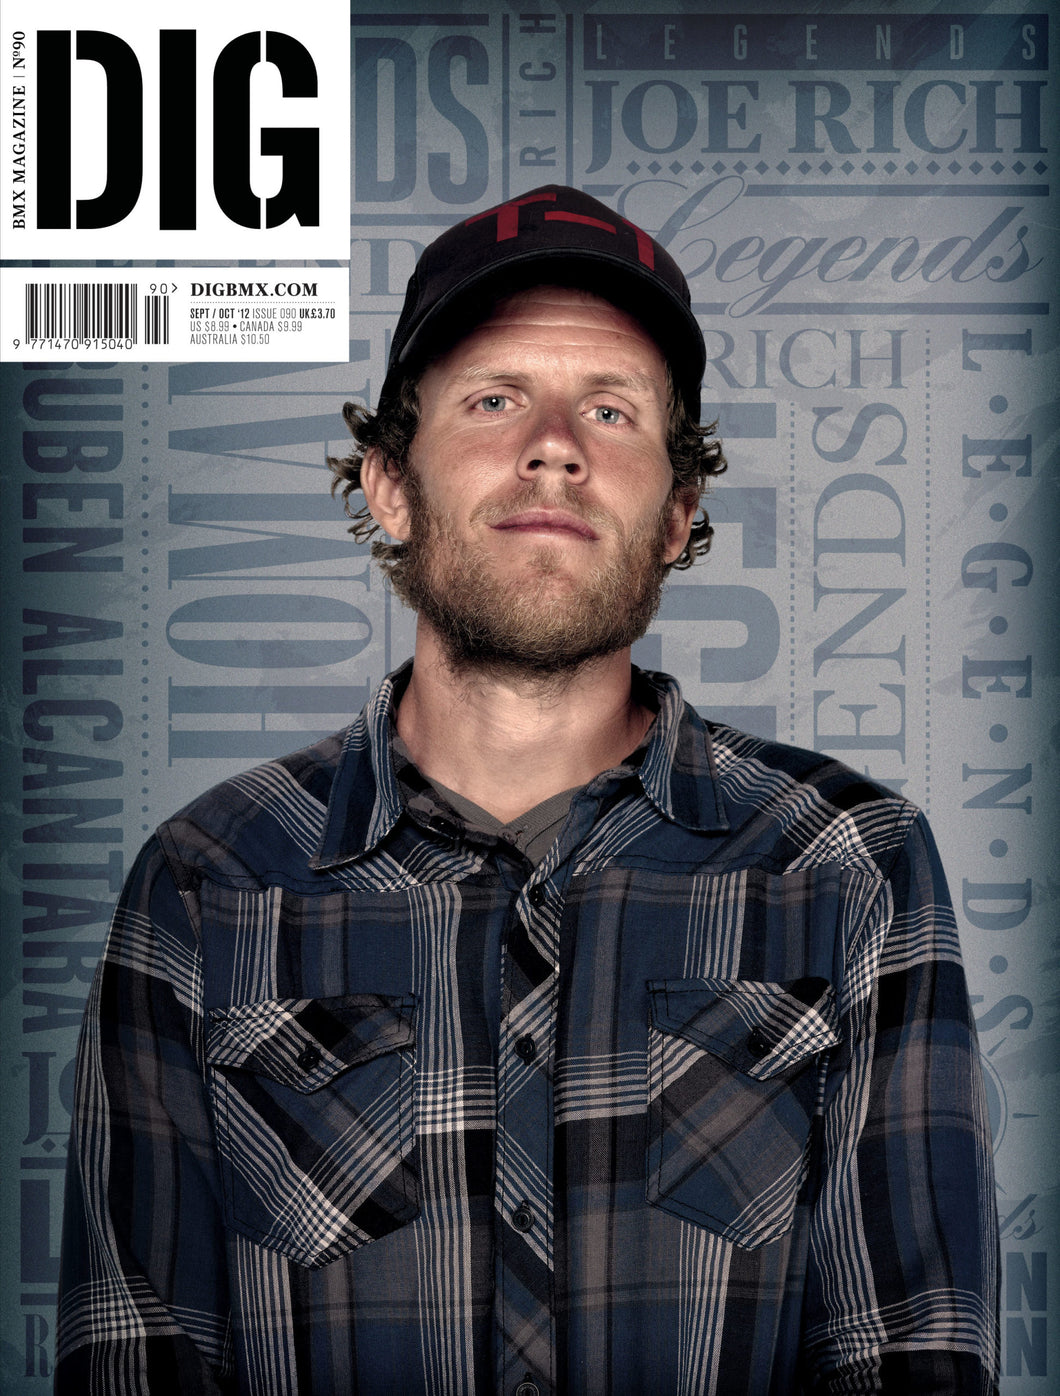 DIG ISSUE 90 - Joe Rich Cover